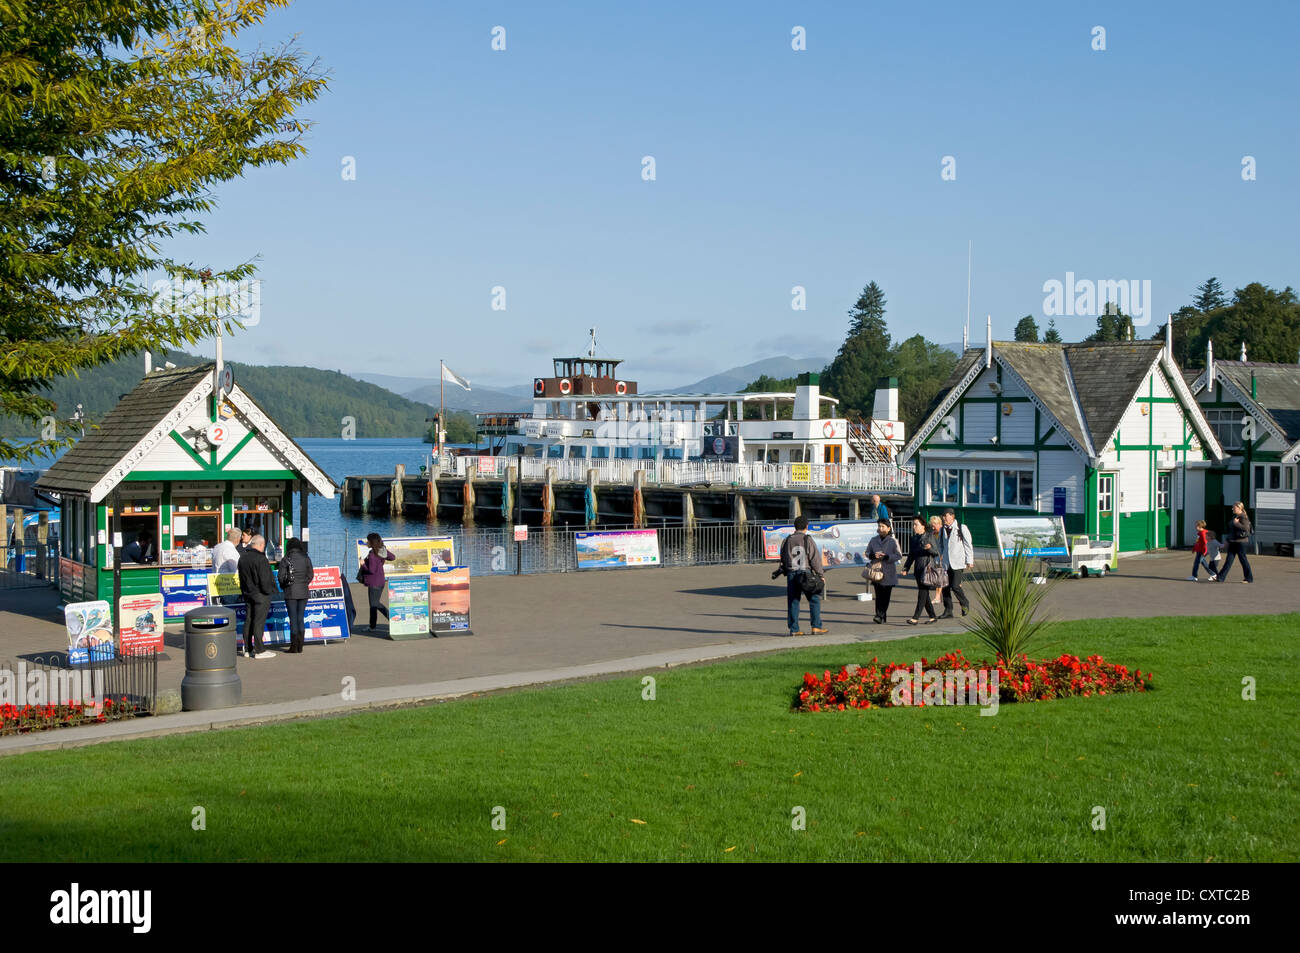 People tourists visitors walking along the promenade in summer Bowness on Windermere Cumbria England UK United Kingdom GB Great Britain Stock Photo